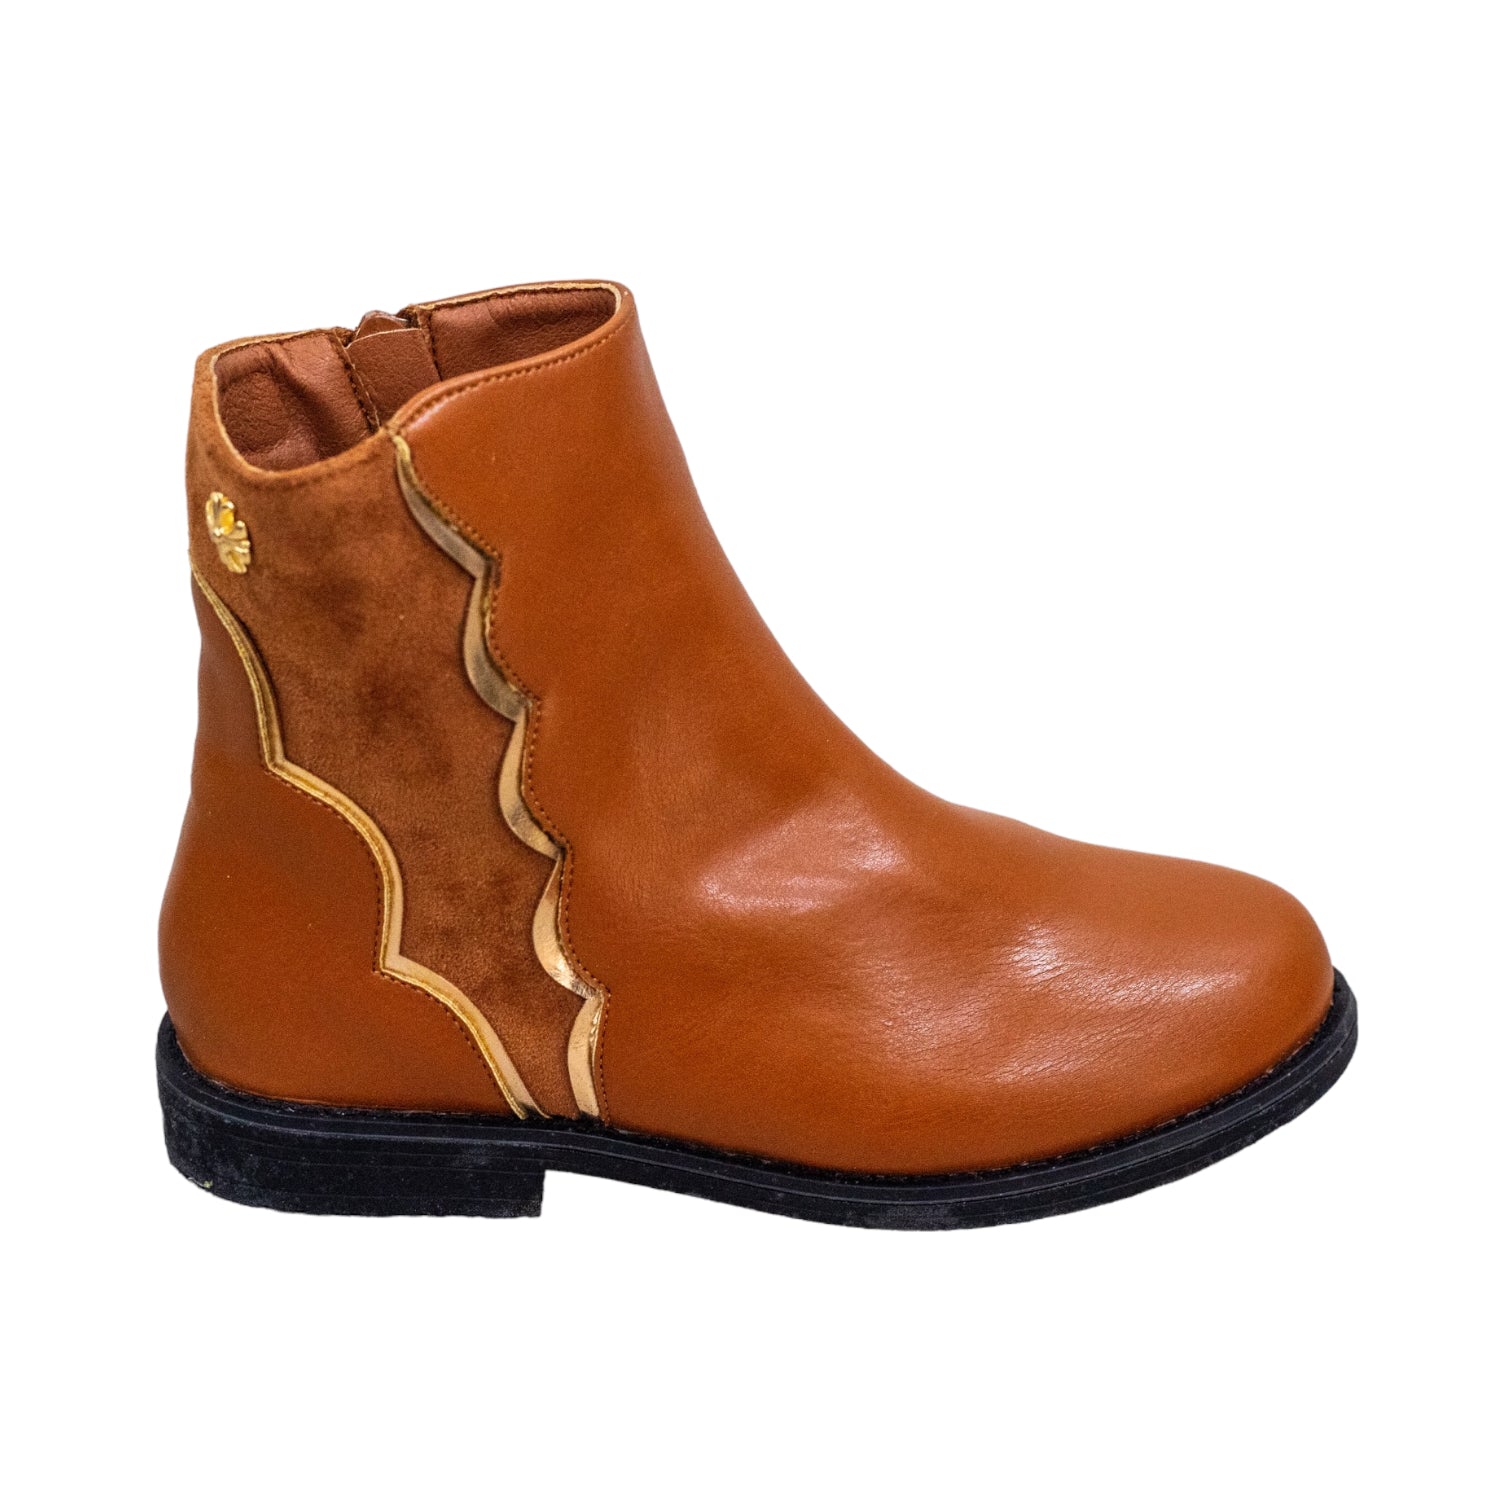 Tan girls ankle boot with side detailed yesenia